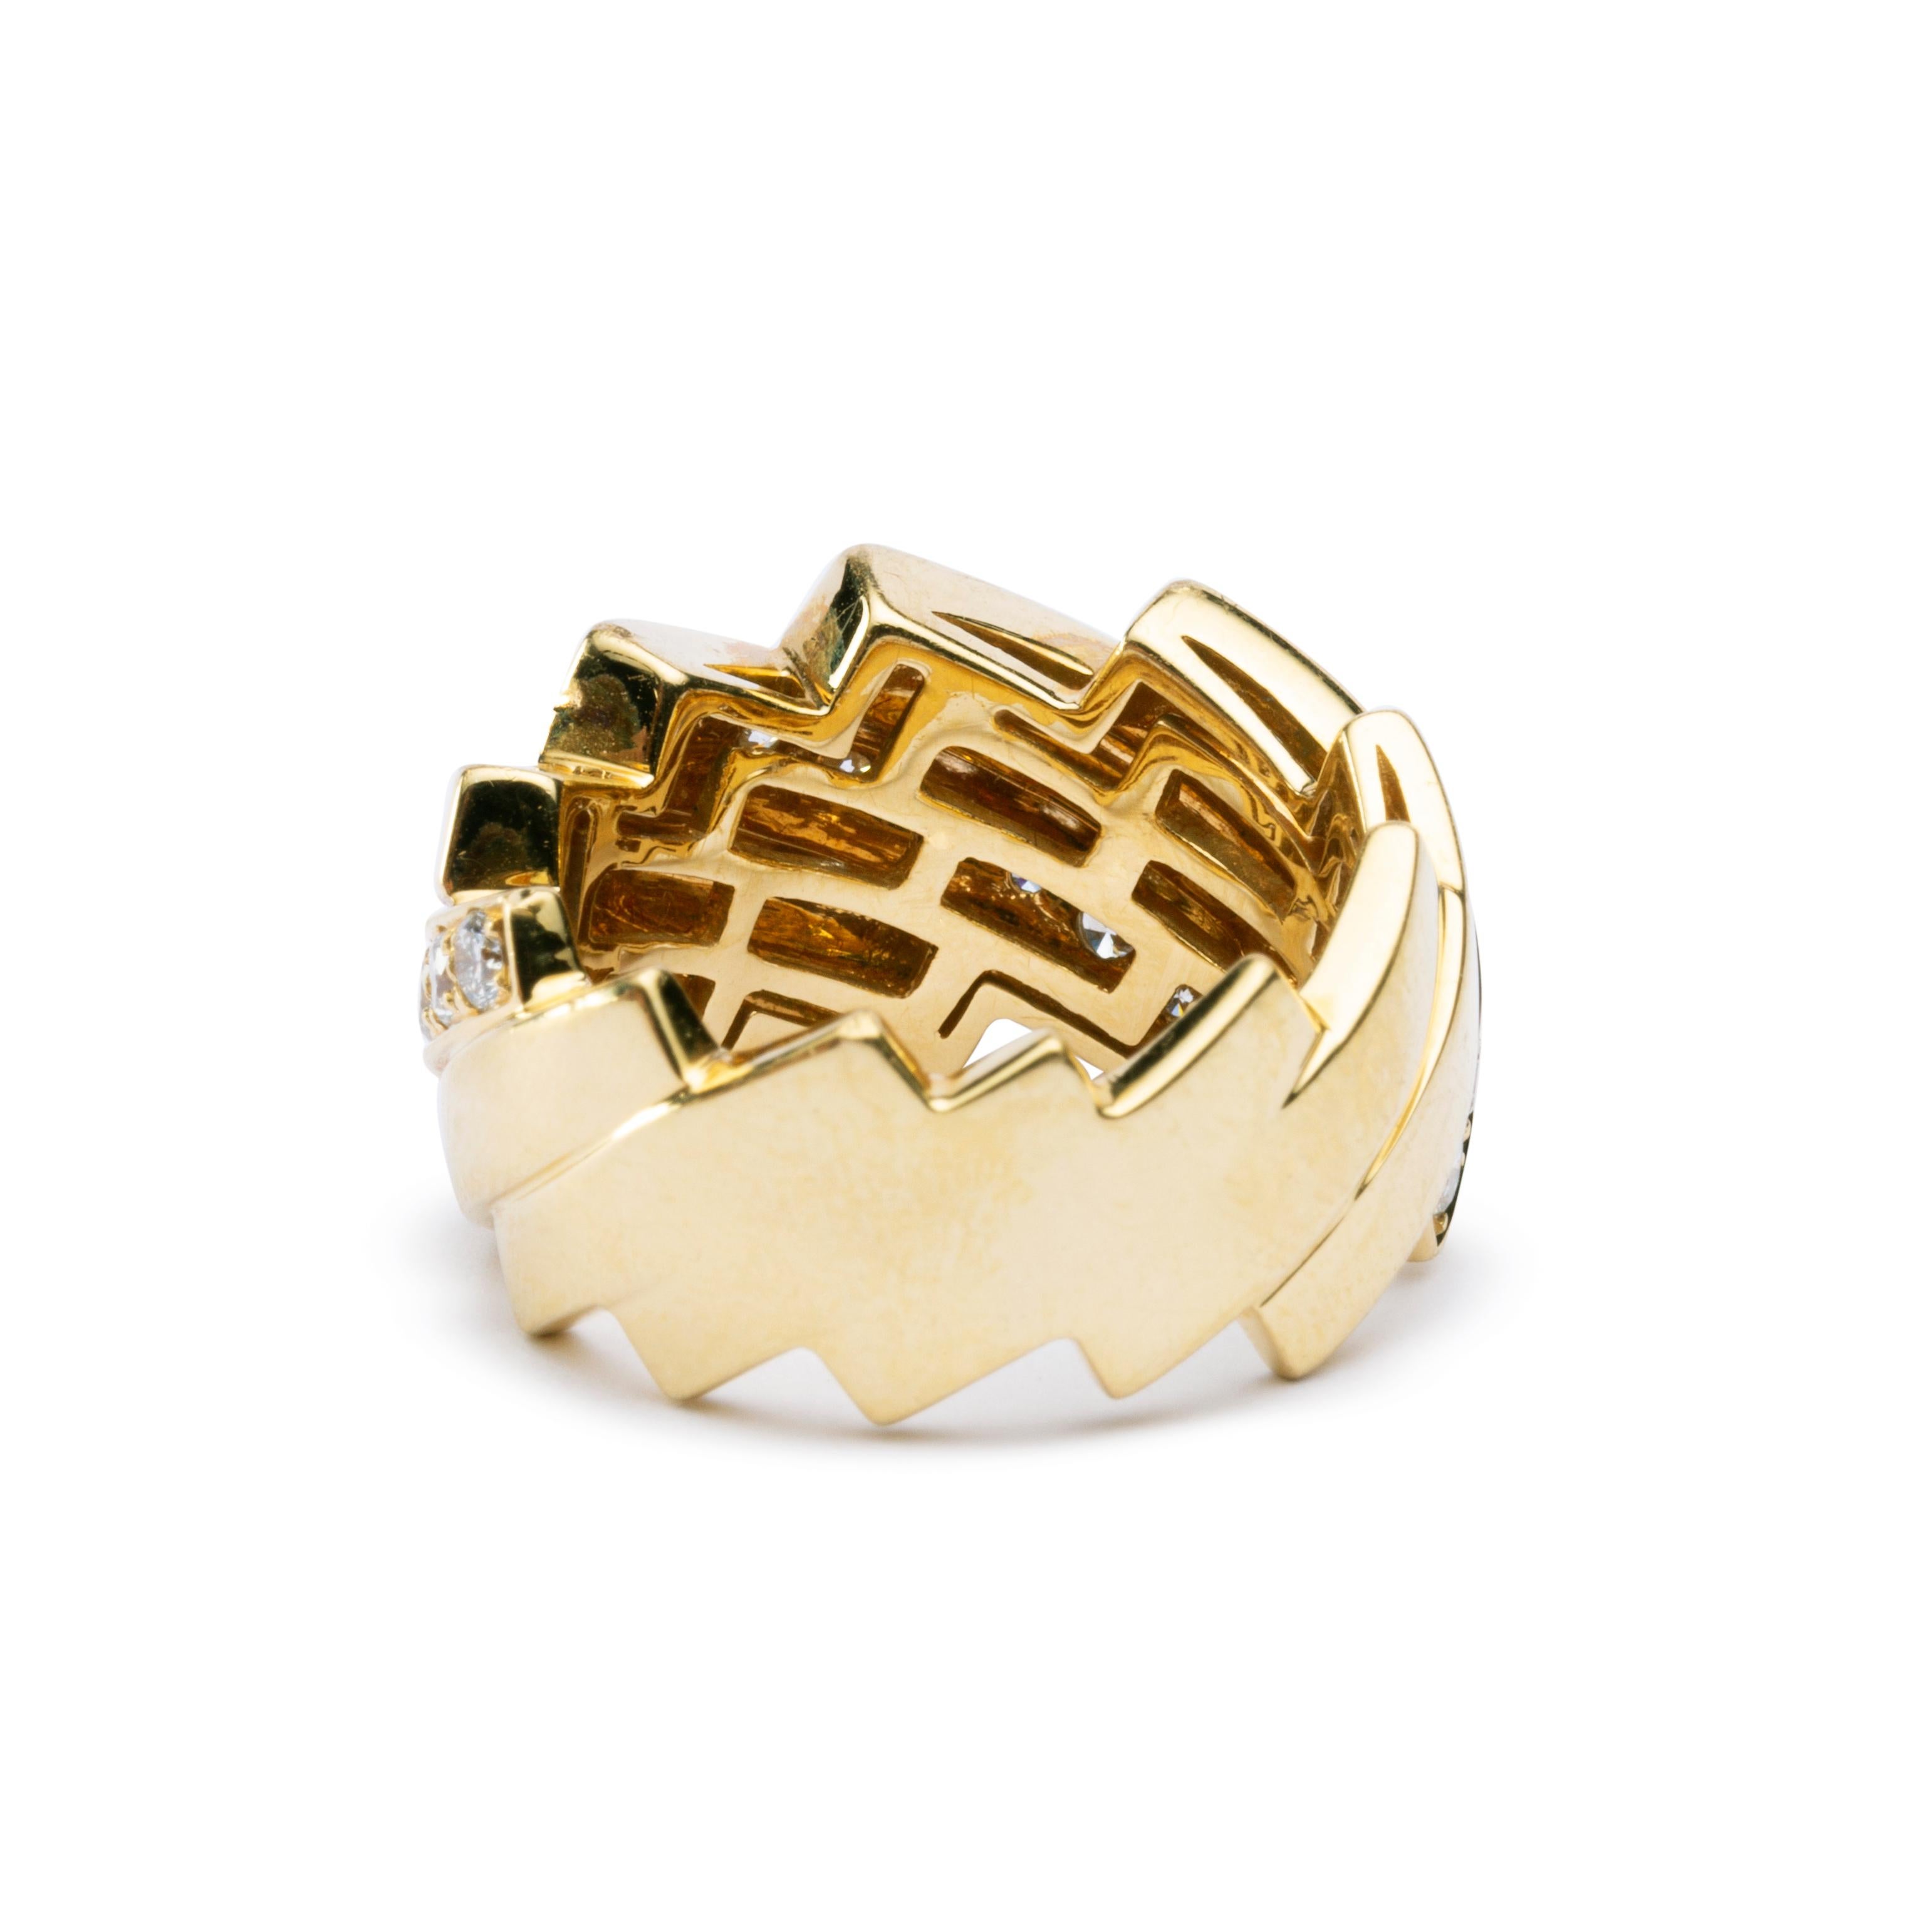 Alex Jona design collection, hand crafted in Italy, 18 karat yellow gold band ring, consisting of a sequence of oblique stripes accented with white diamonds weighing 0.97 carats.  
Size US 6.5, can be sized to any specification.
Alex Jona jewels